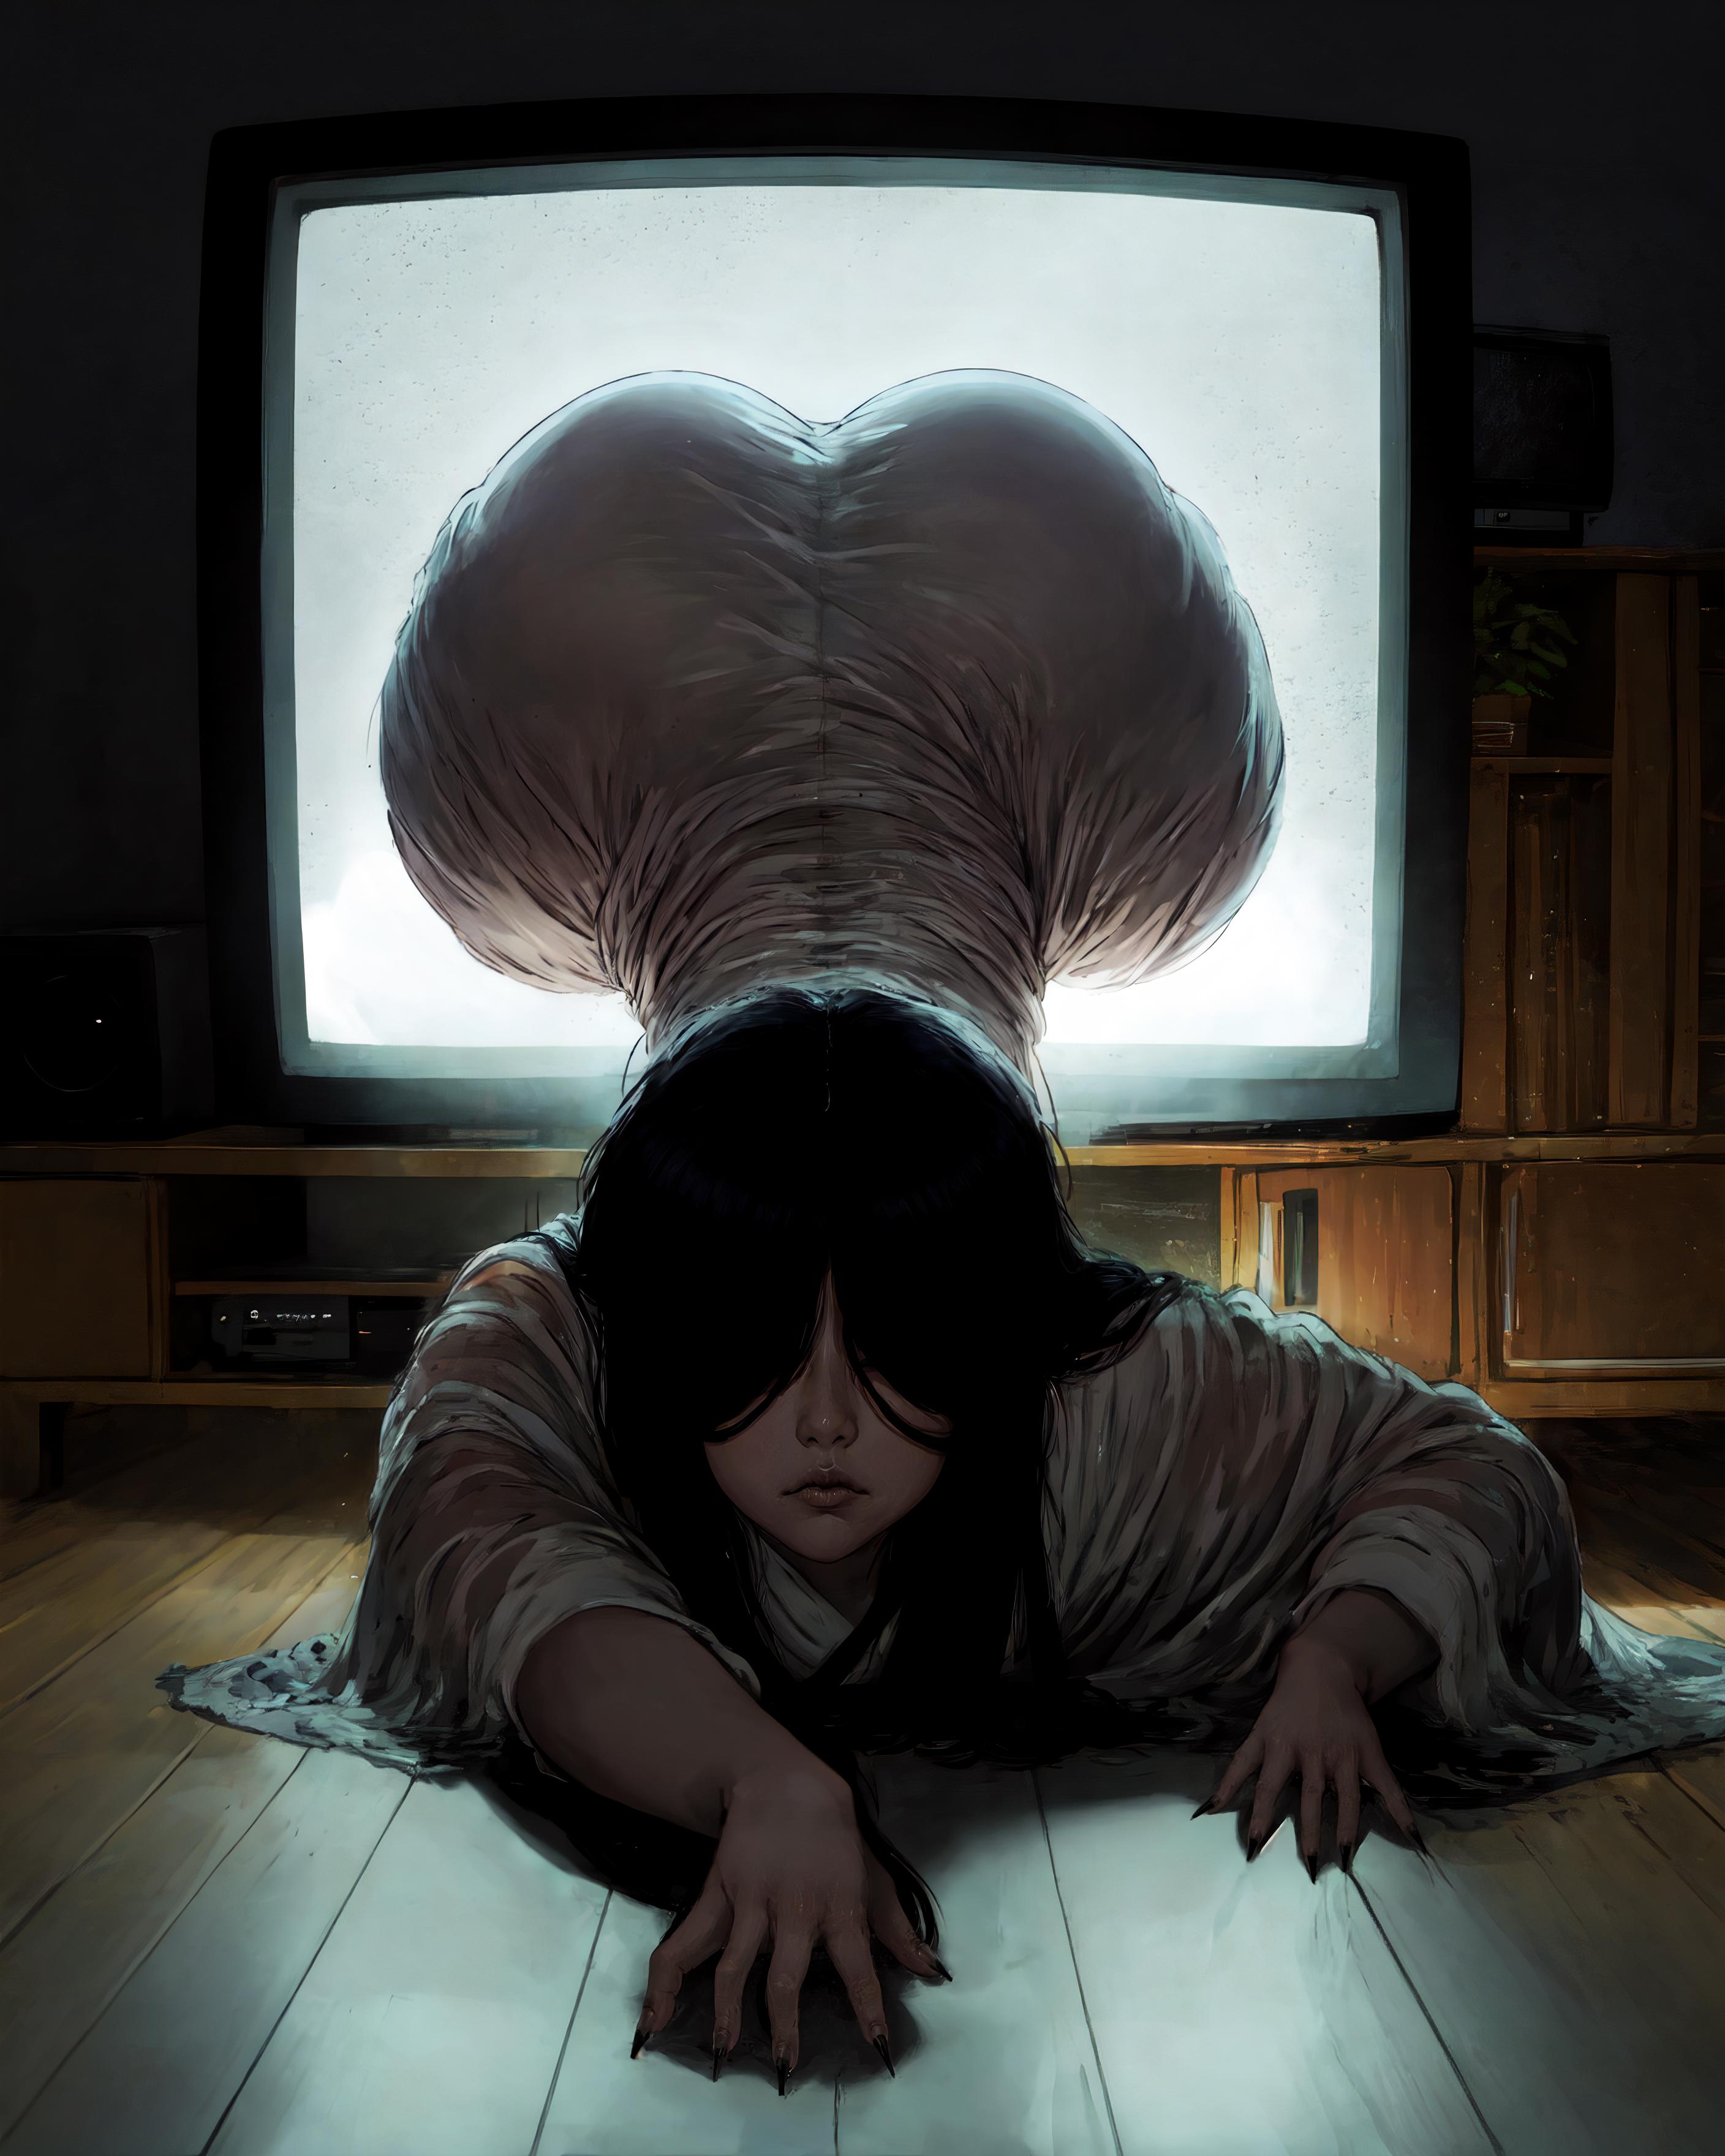 A woman with a large butt is laying on the floor in front of a TV.